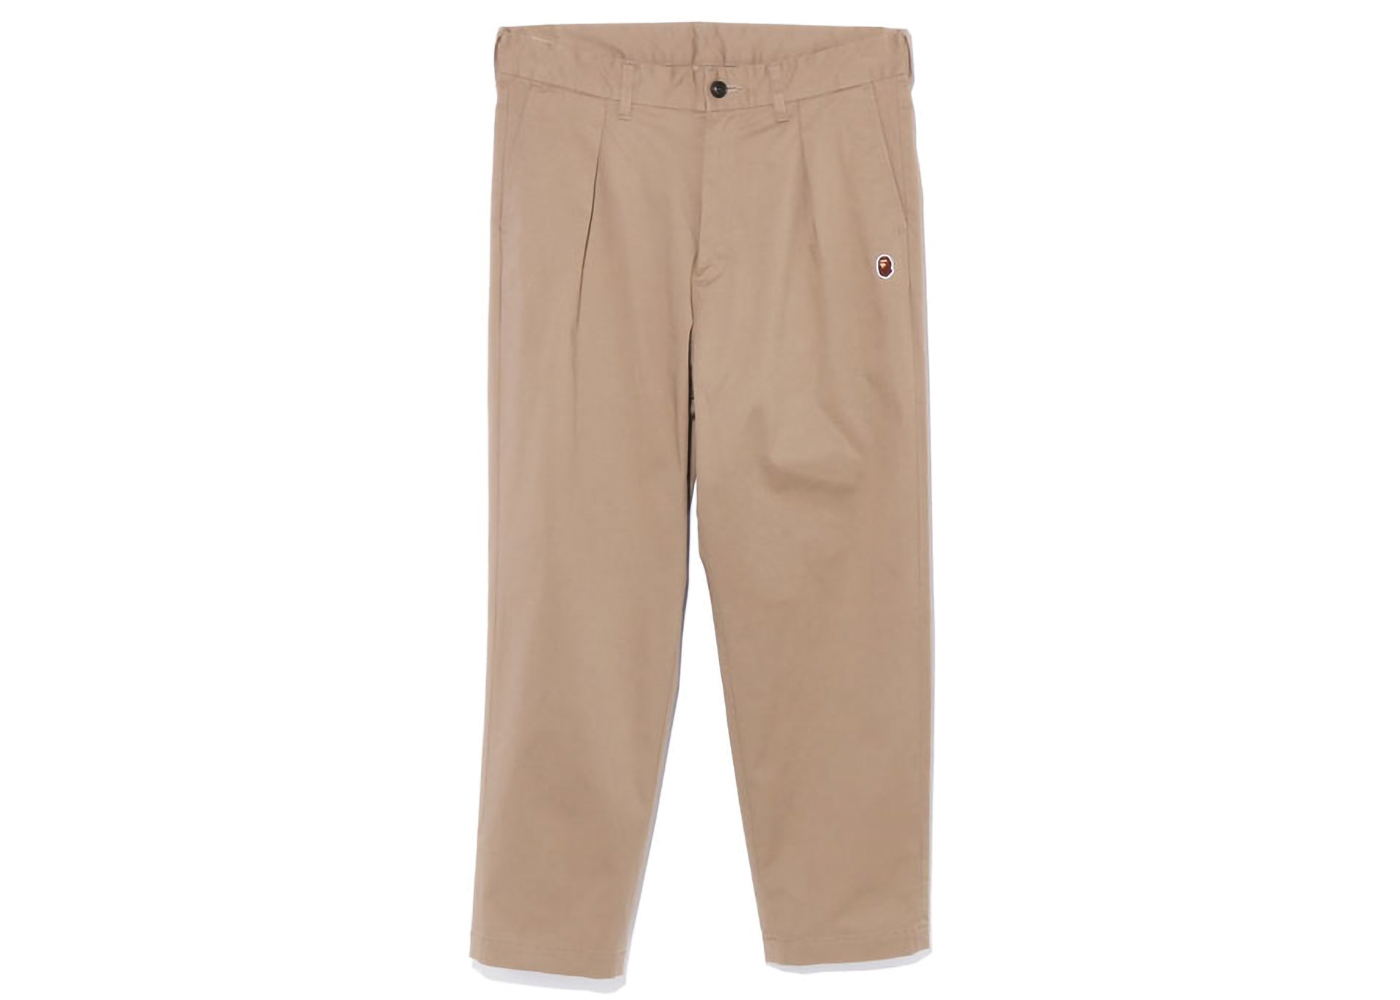 BAPE One Point Relaxed Fit Chino Pants Beige - FW22 Men's - US